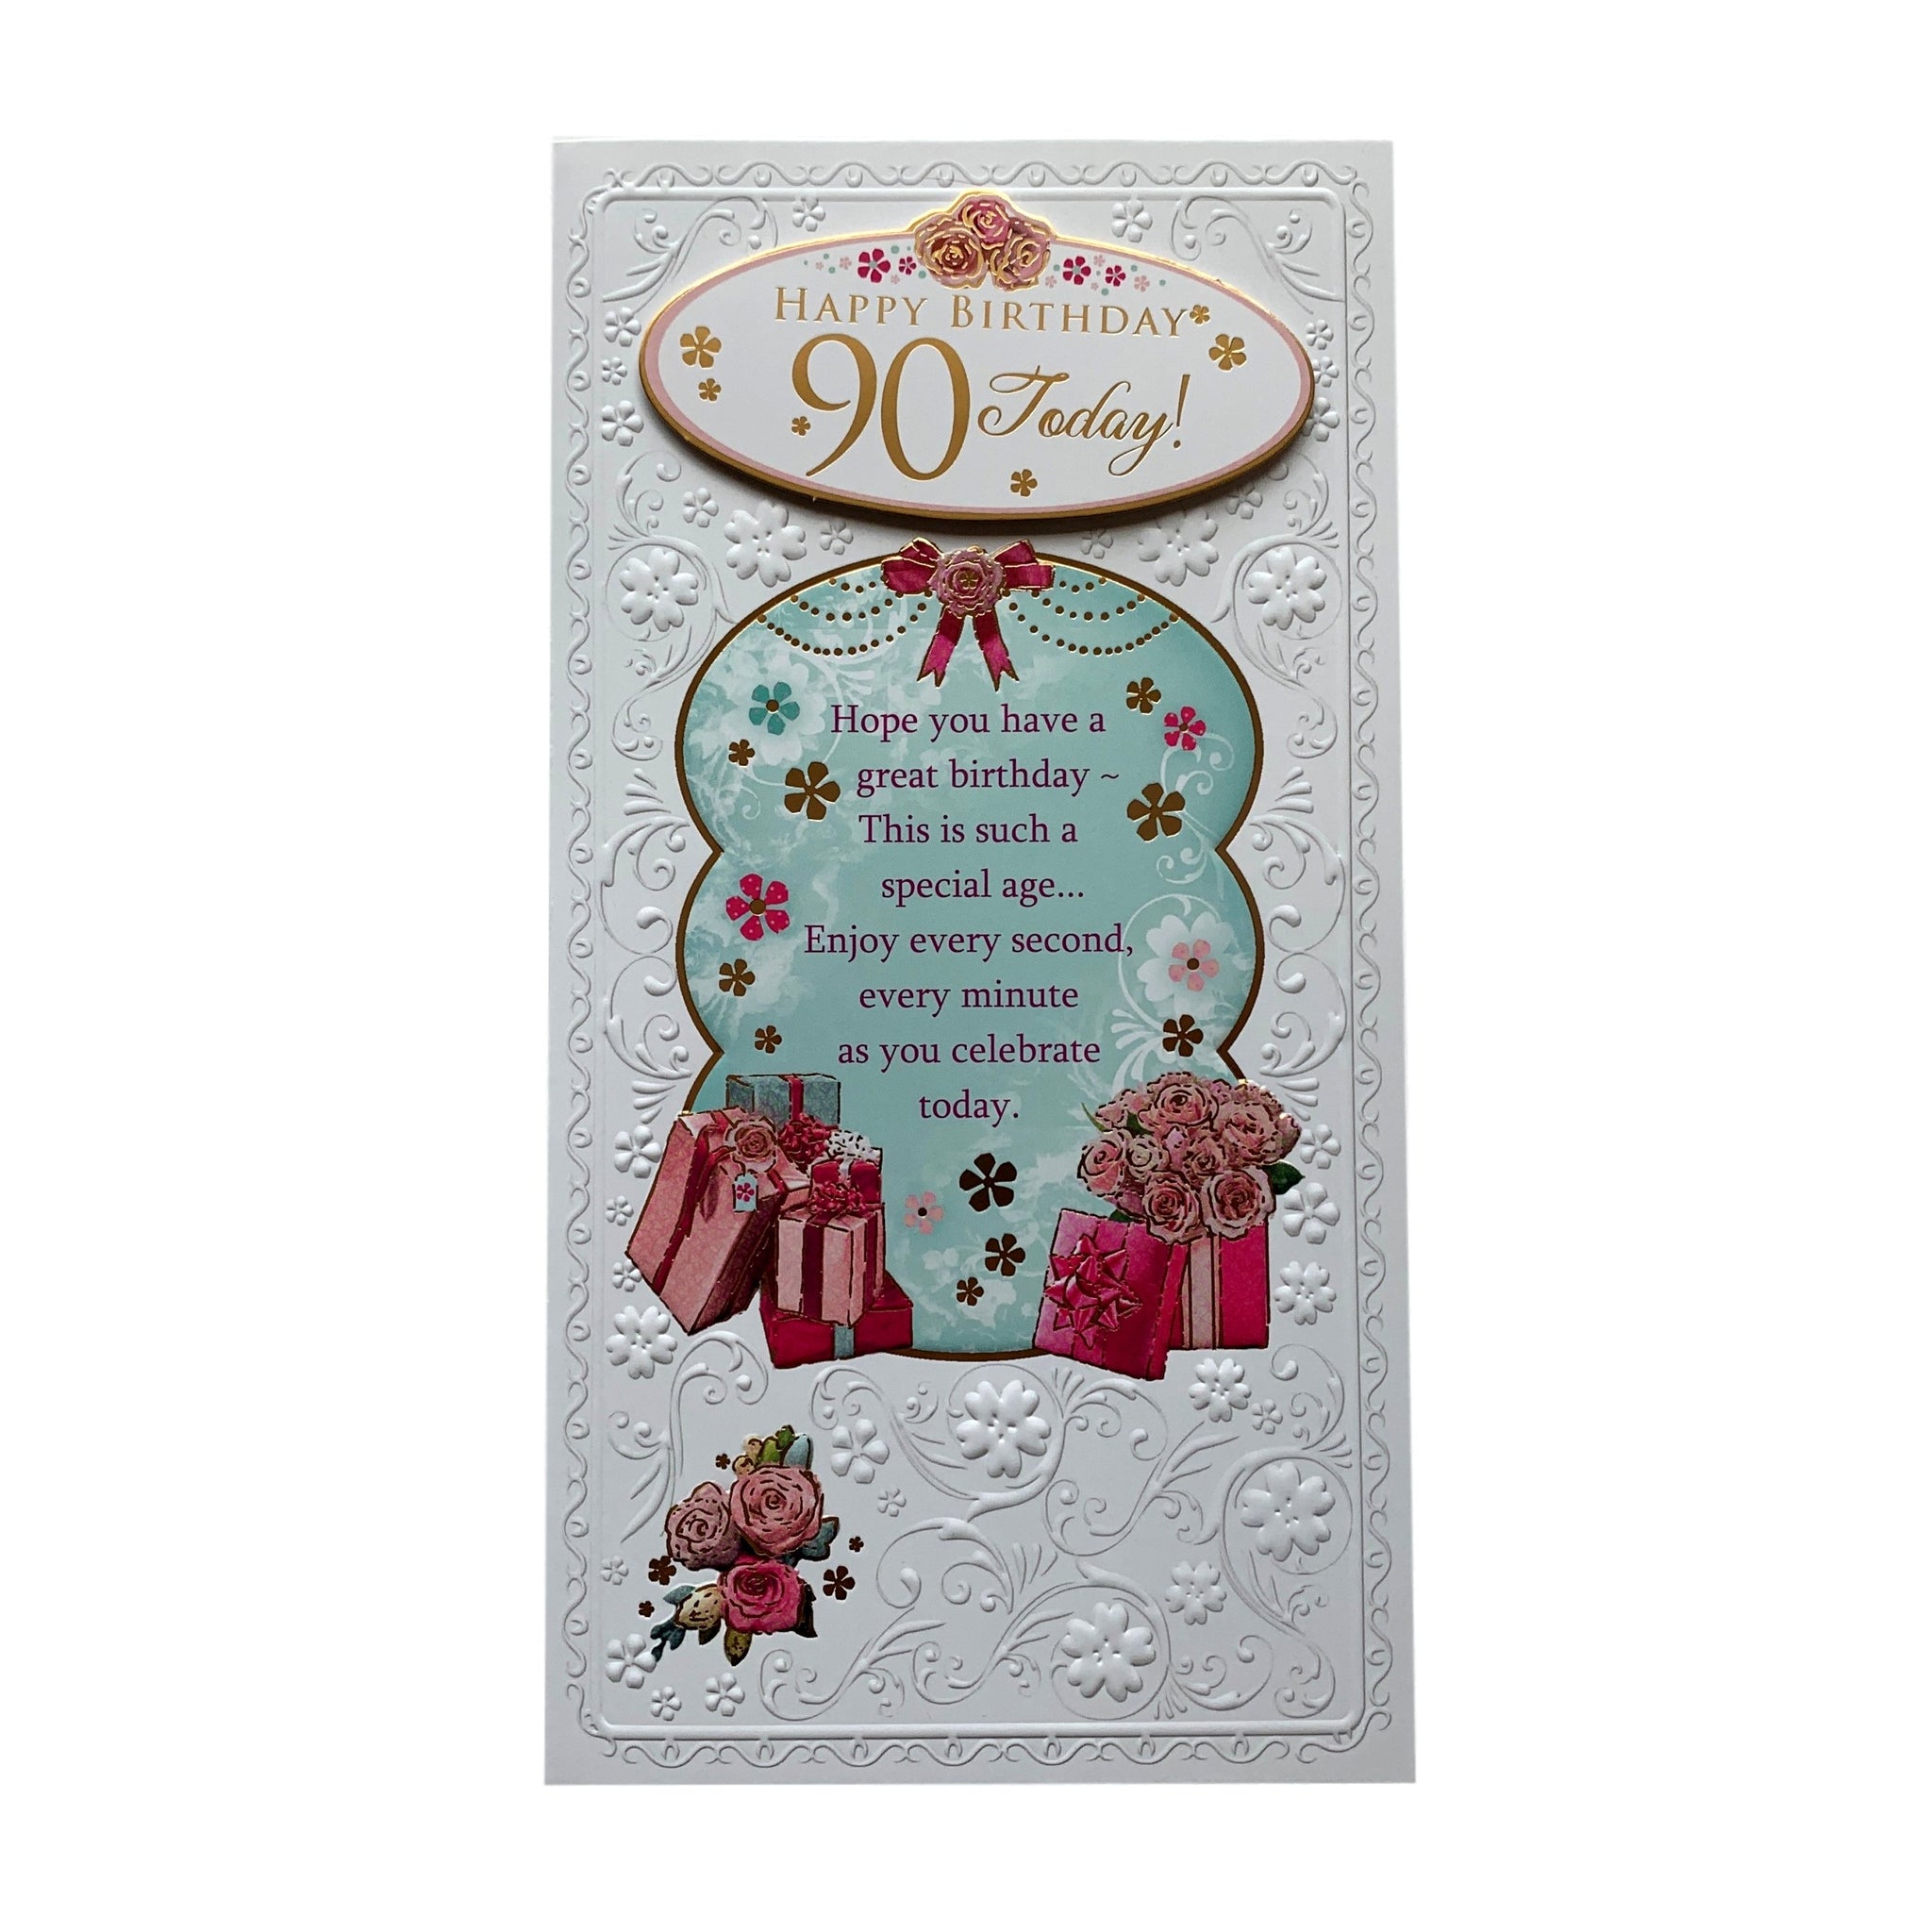 On 90th Birthday Open Female Soft Whispers Card